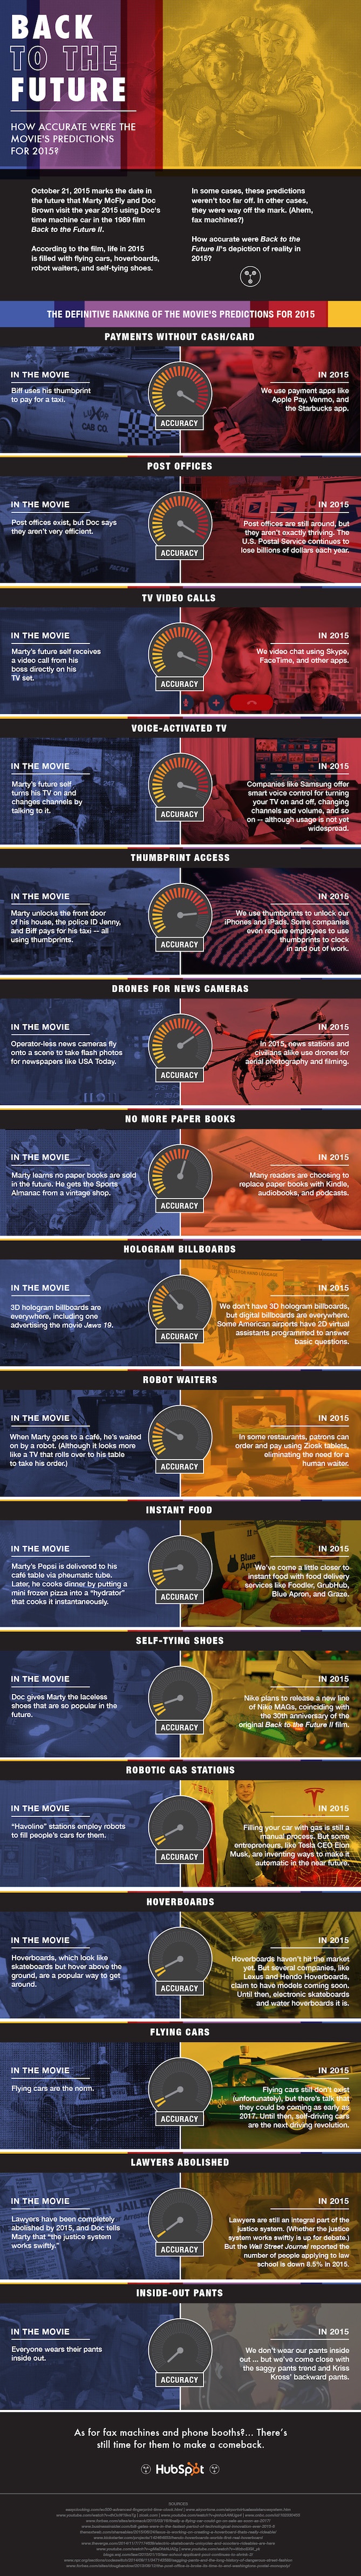 back-to-the-future-predictions-infographic